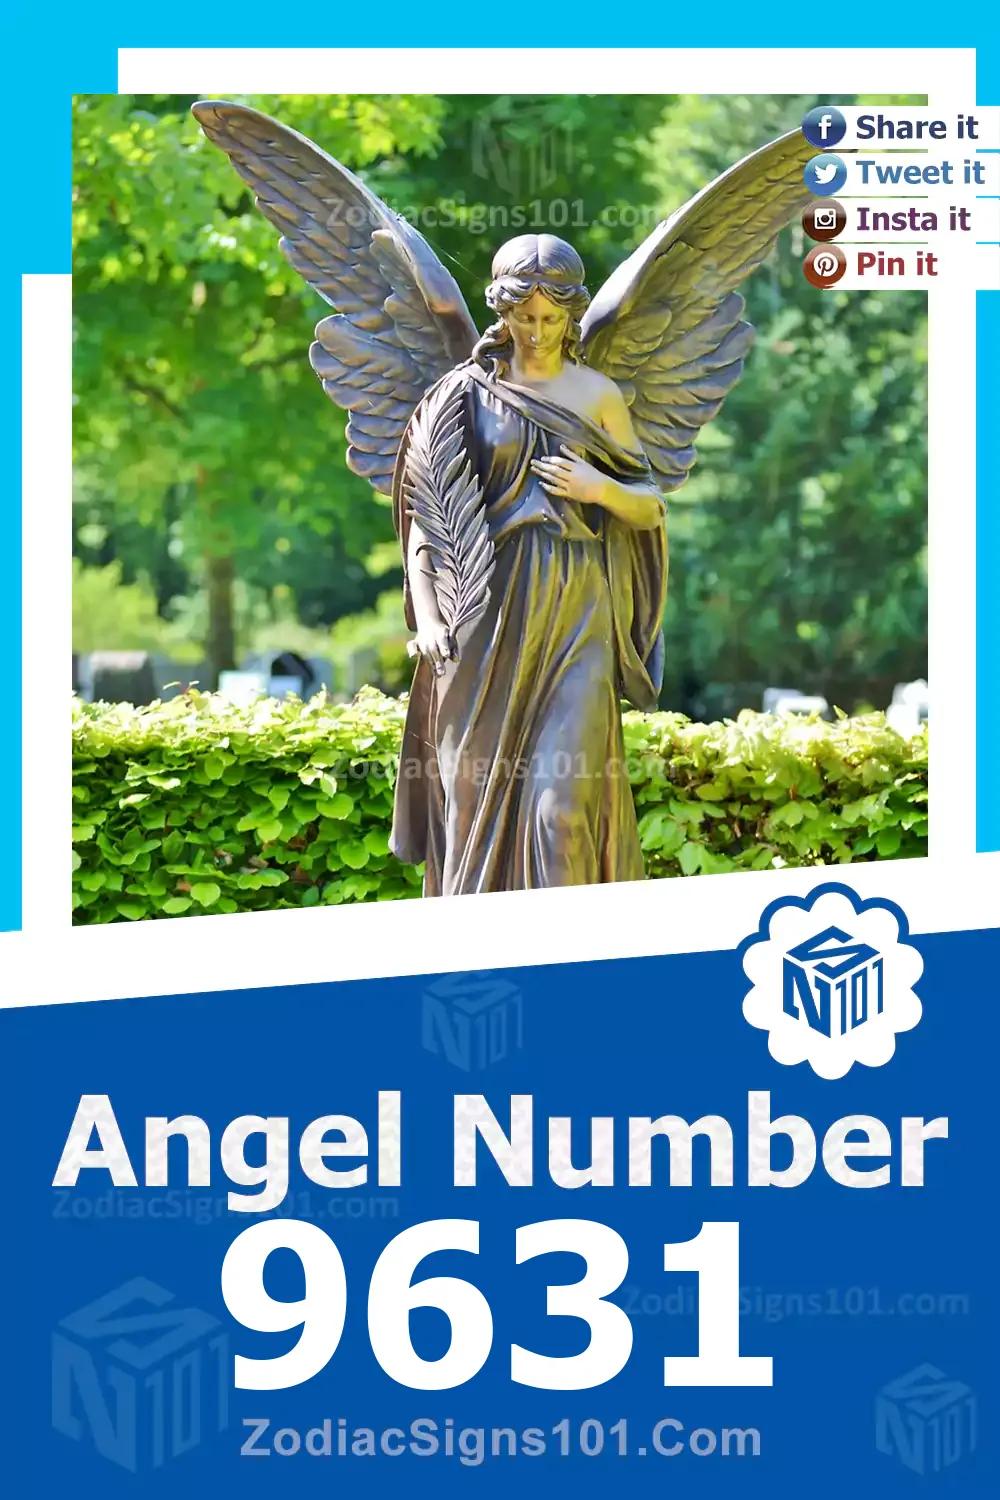 9631 Angel Number Meaning